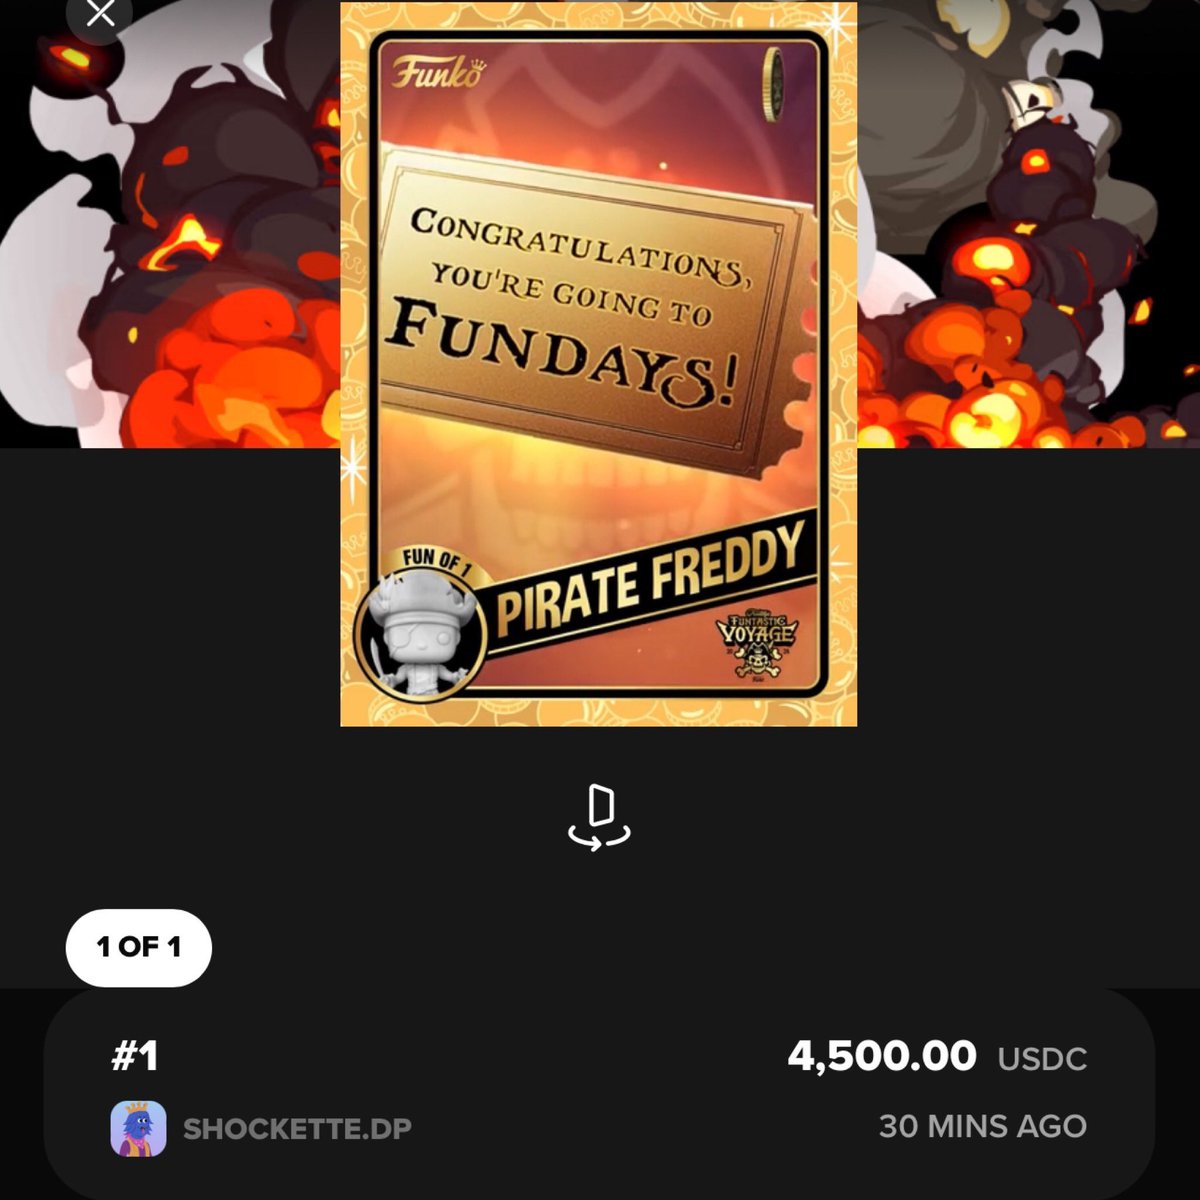 Droppp user Shockette bought the Fundays ticket Fun of 1 card for $4500.
.
#Funko #FunkoPop #FunkoPopVinyl #Pop #PopVinyl #Collectibles #Collectible #FunkoCollector #FunkoPops #Collector #Toy #Toys #DisTrackers